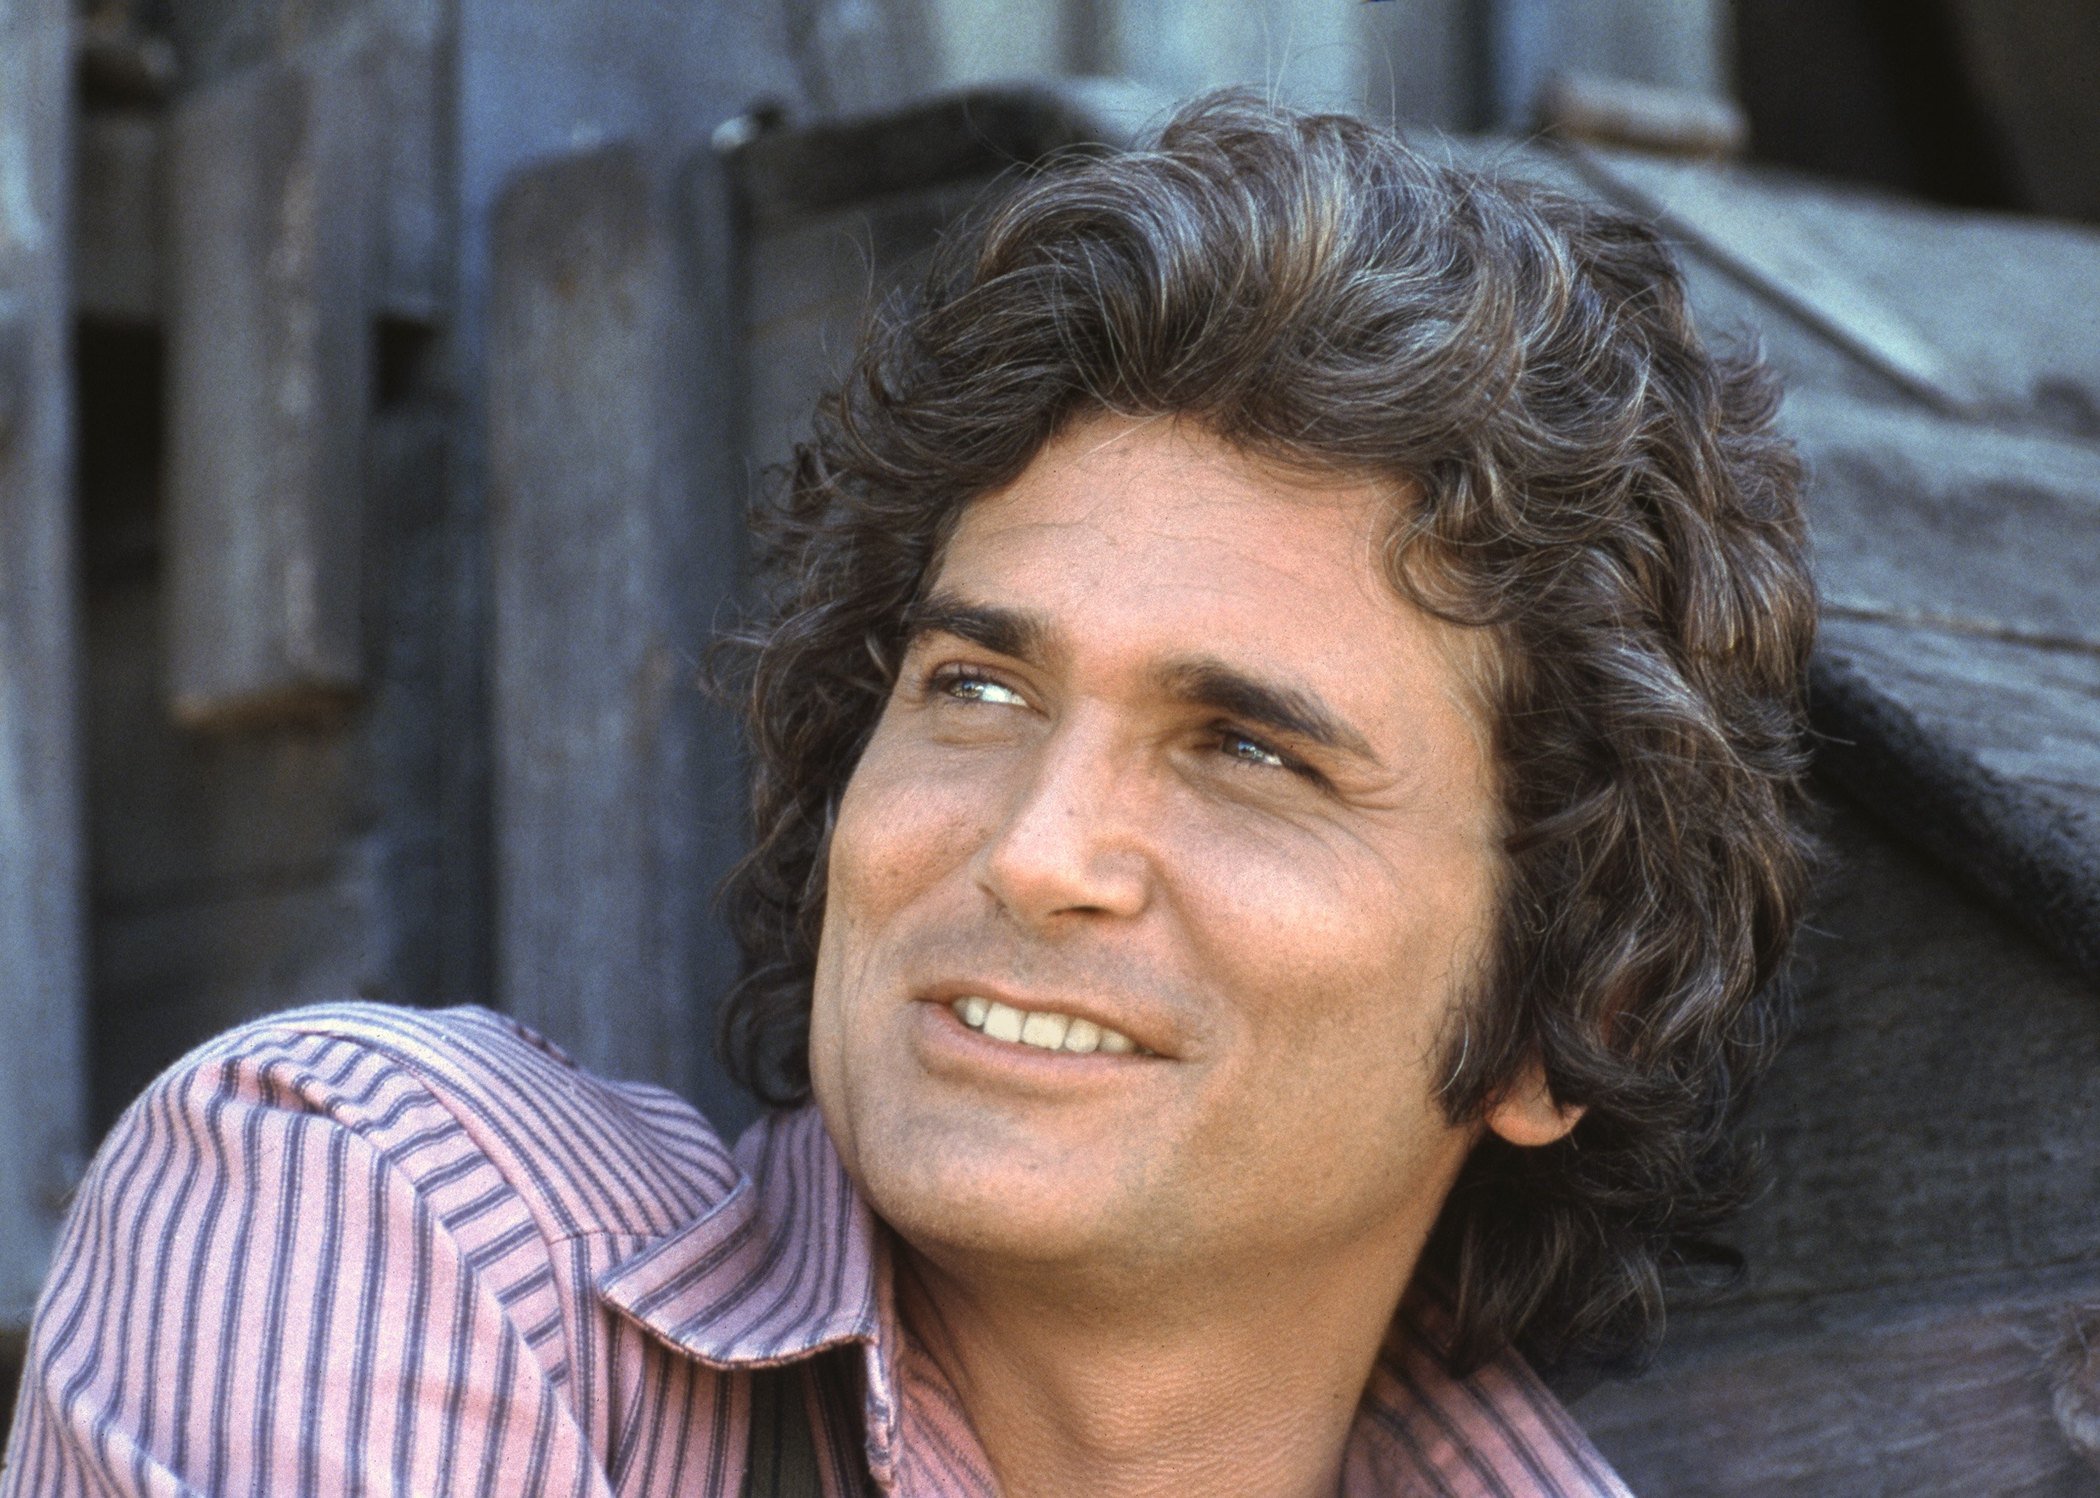 Michael Landon as Charles Philip Ingalls in 'Little House on the Prairie'